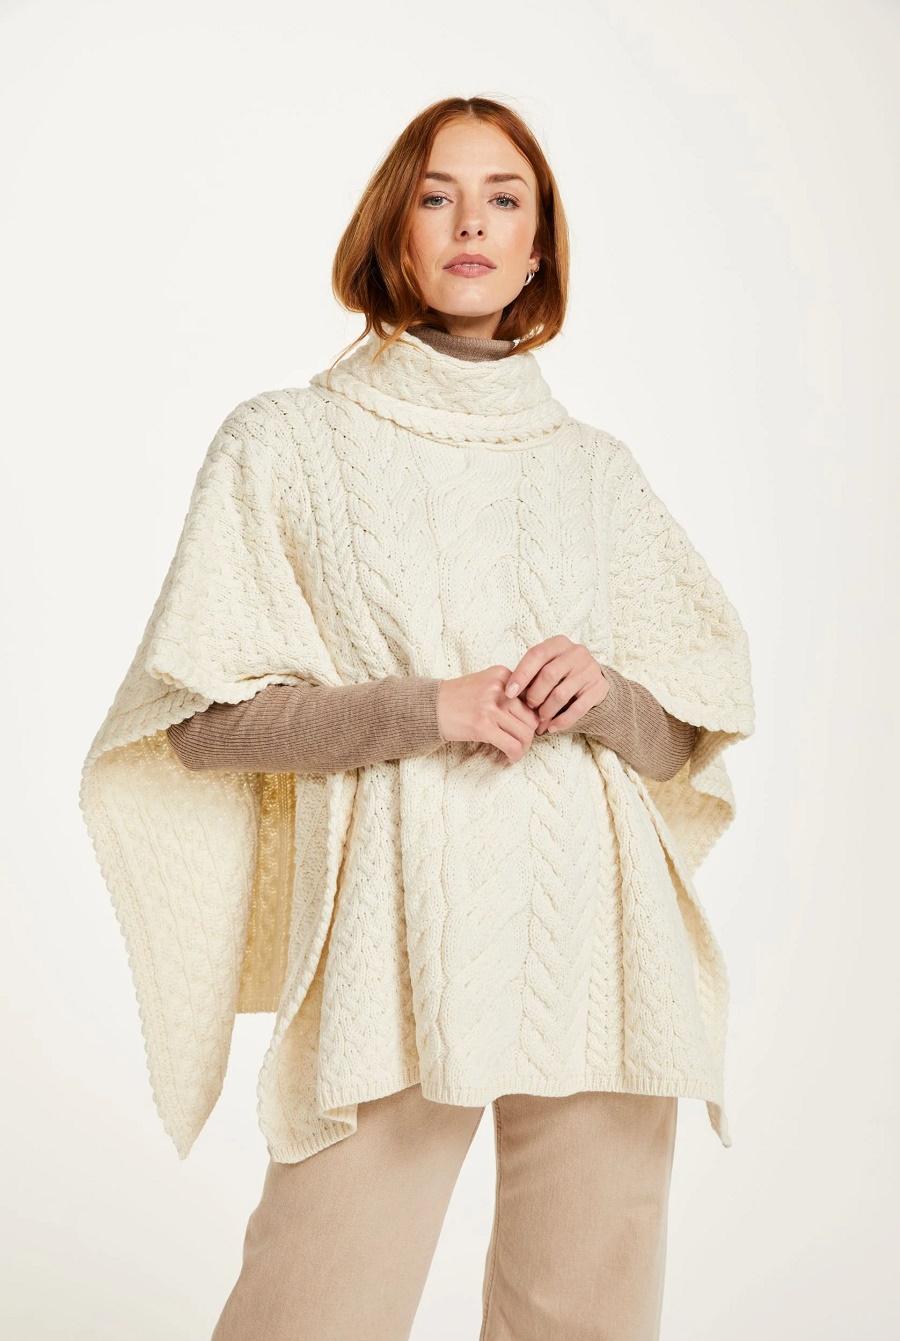 Aran Woollen Mills Wool Cowl Neck Poncho (White) Clothing Capes Shawls ...